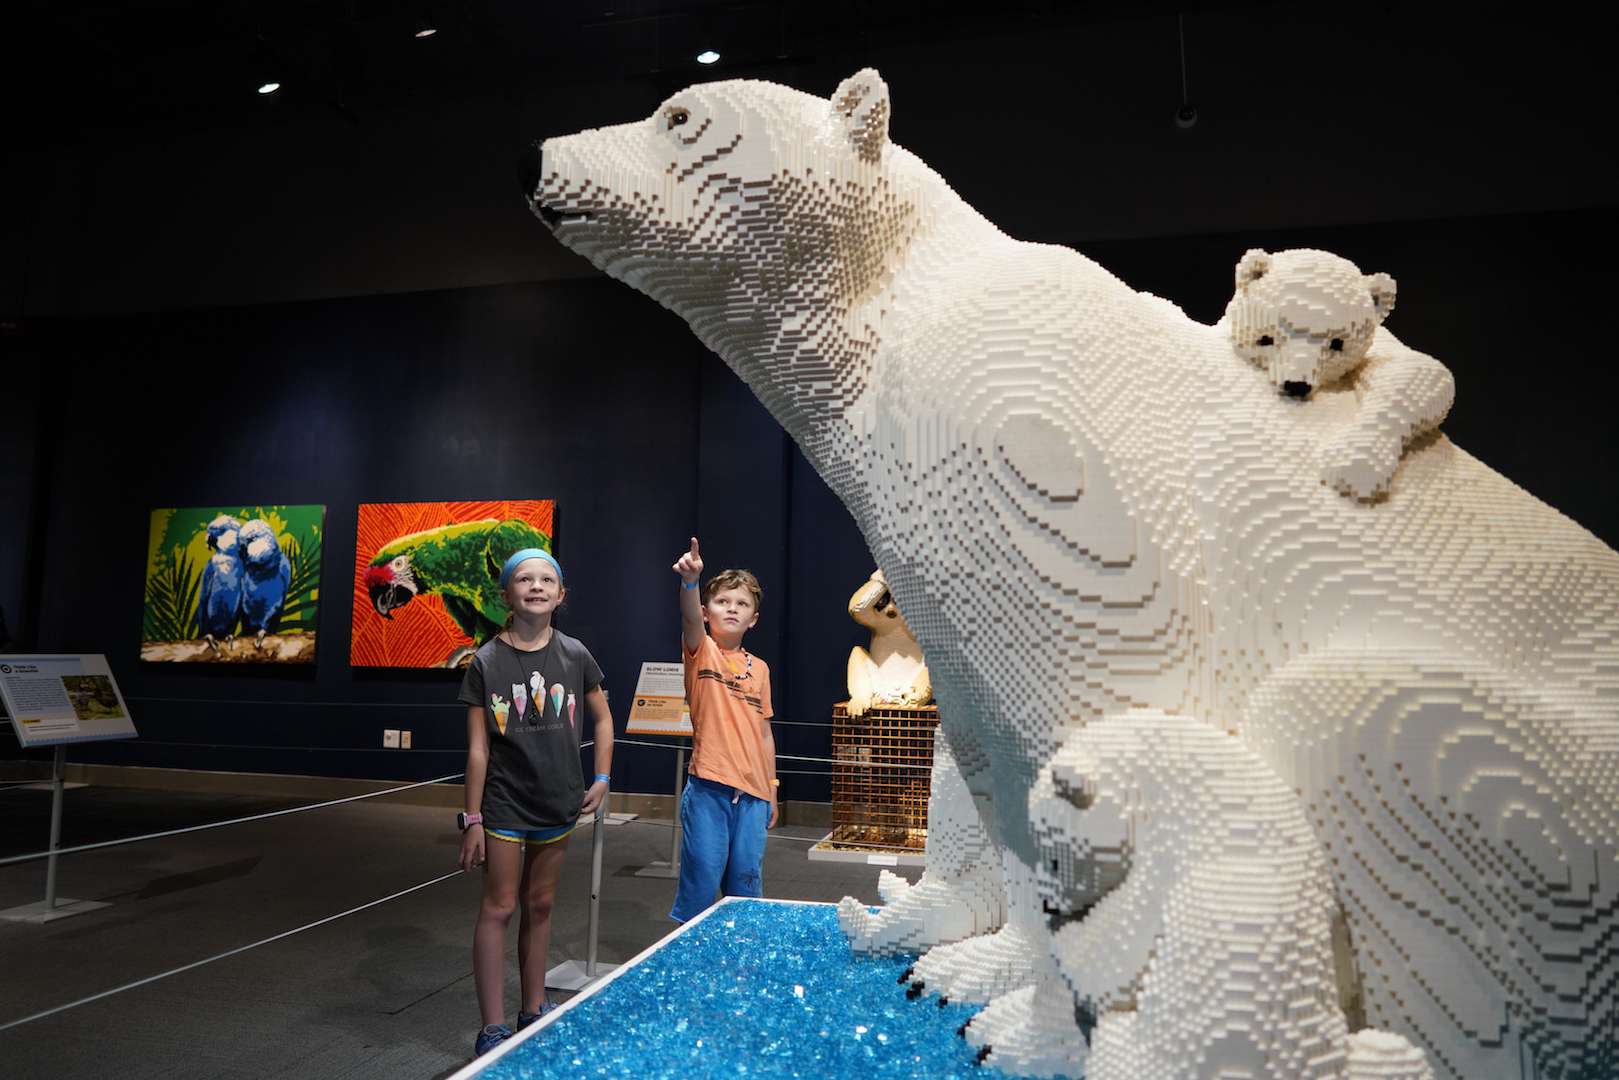 Kids looking at polar bear made out of LEGO pieces